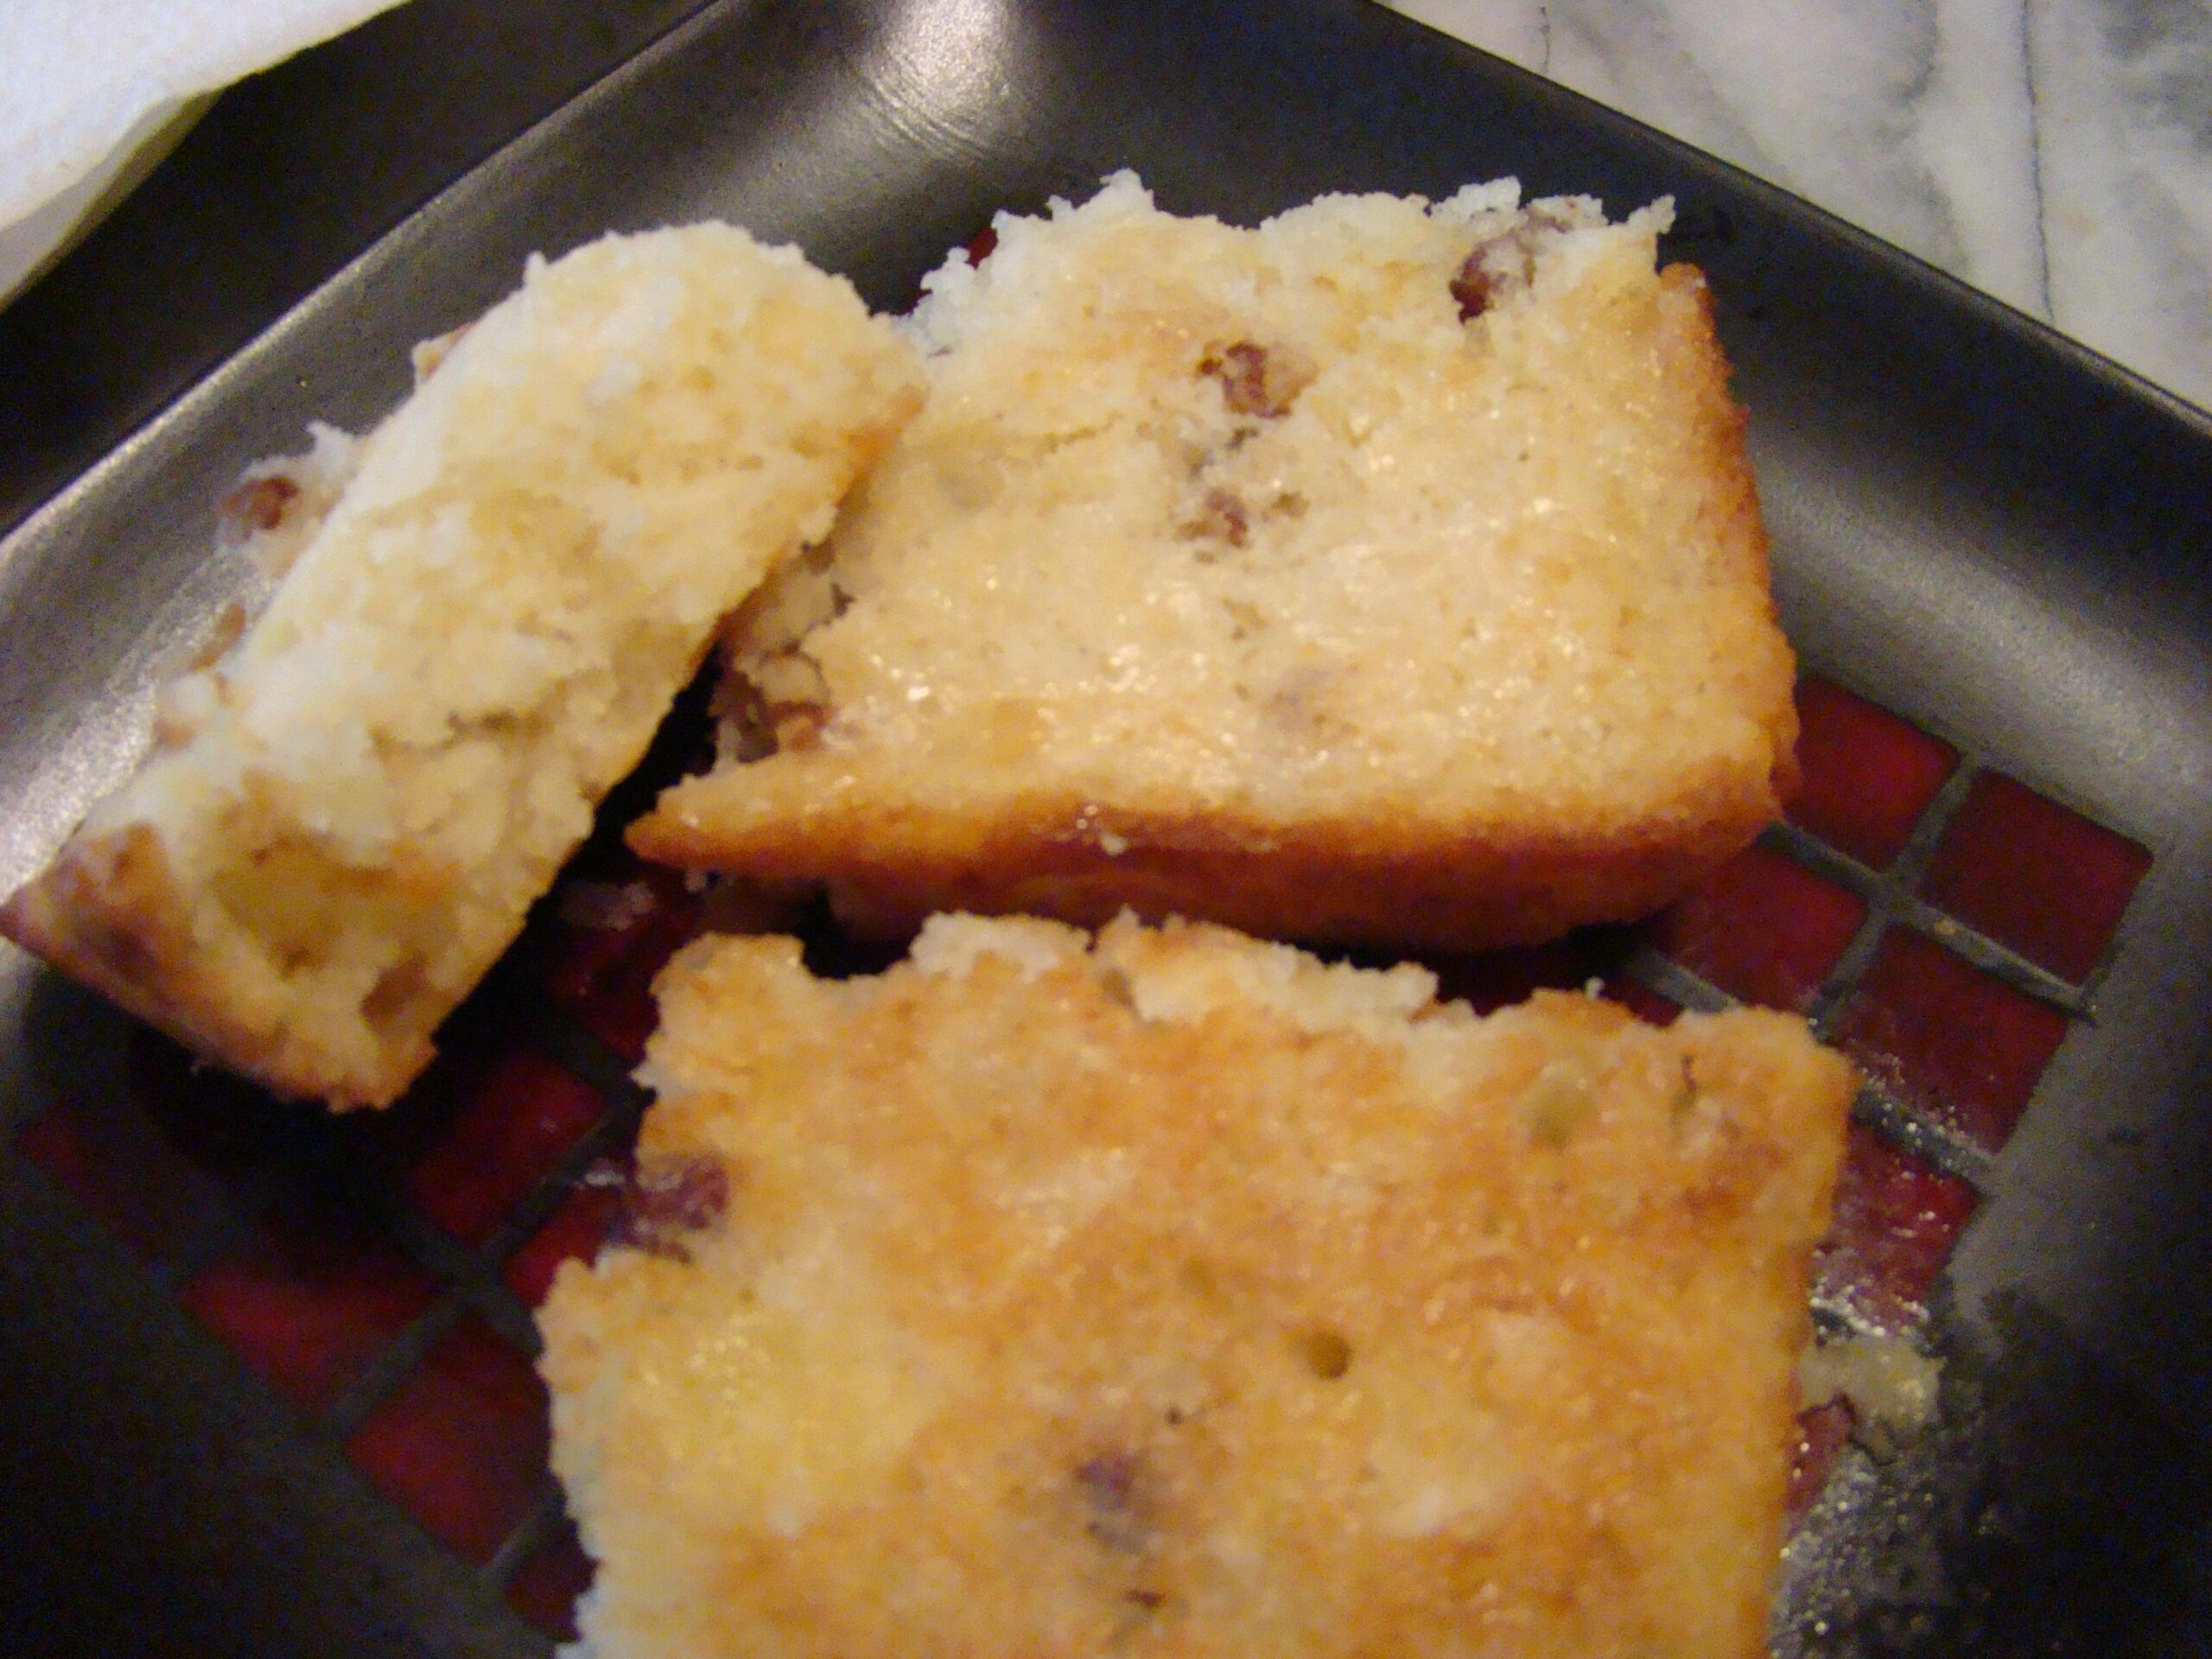 Delicious Pineapple Coffee Cake Recipe for Breakfast